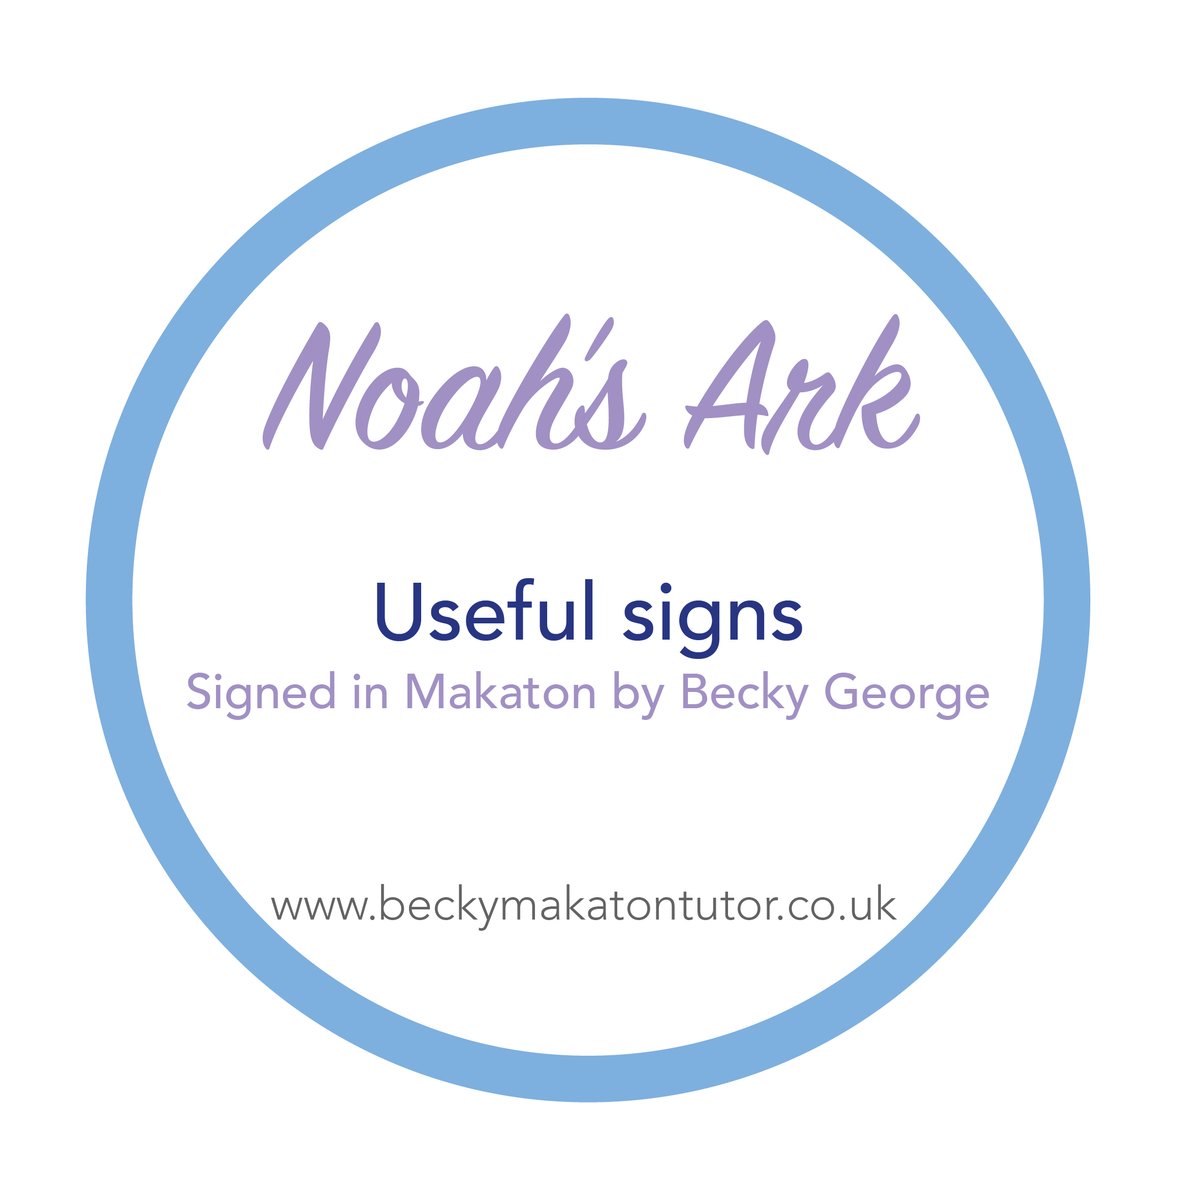 Here's some of the key signs you could use when telling the bible story Noah's Ark.

Please share with others.
youtu.be/9tP_Sd4uqQg

#makaton #biblestory #makatoninchurch #noahsark